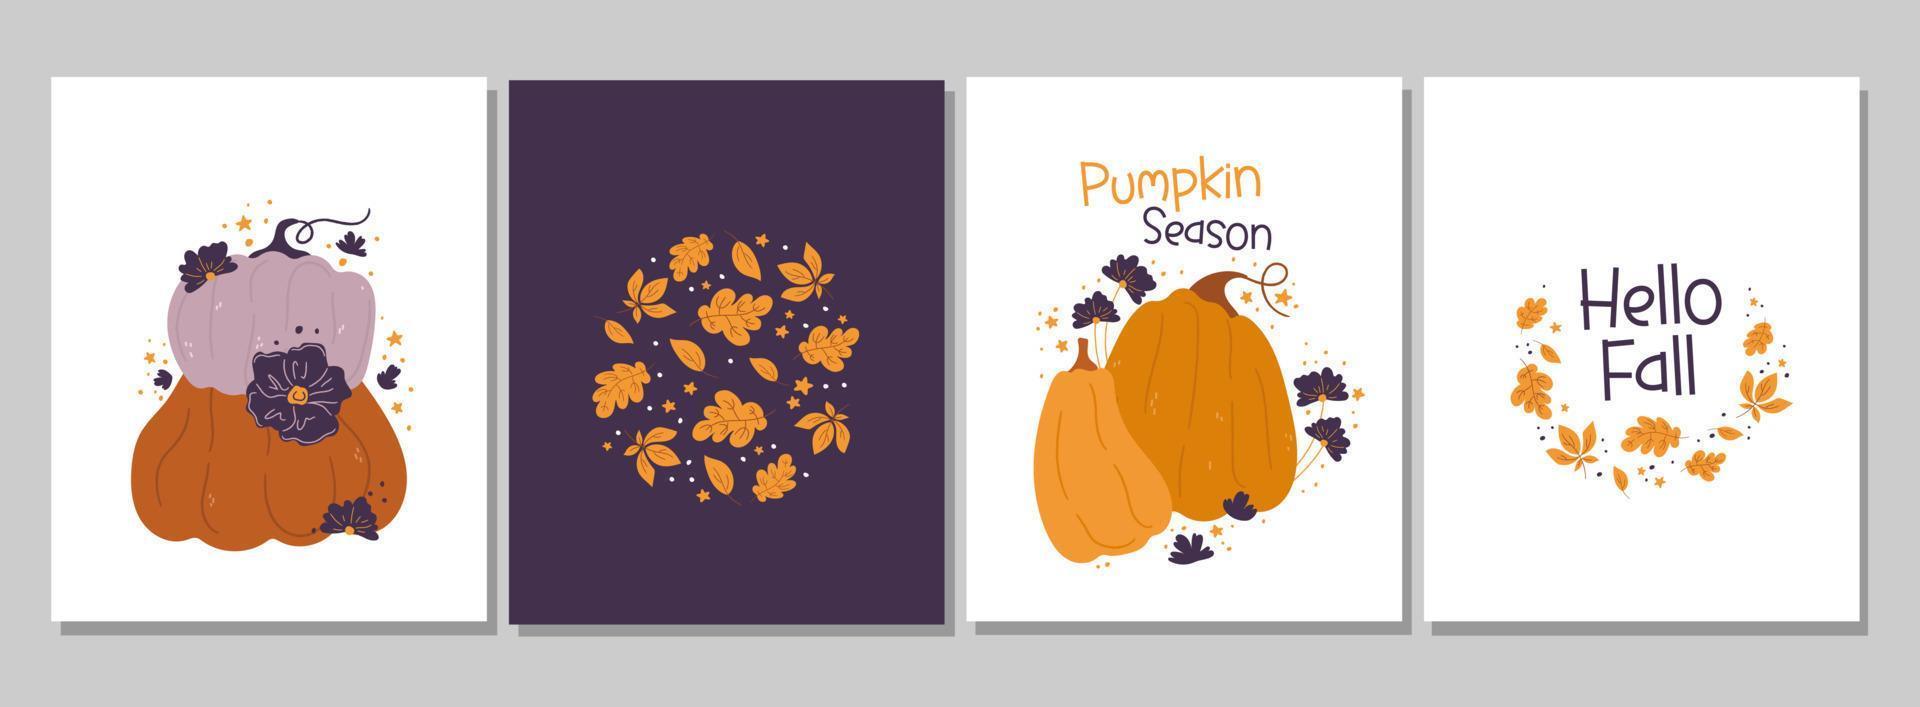 Decorating a child's room. Cute pumpkins and leaves. Nursery wall arts. Kawaii Pumpkin autumn characters. Set of vector illustrations perfect for cards, invitations, posters.